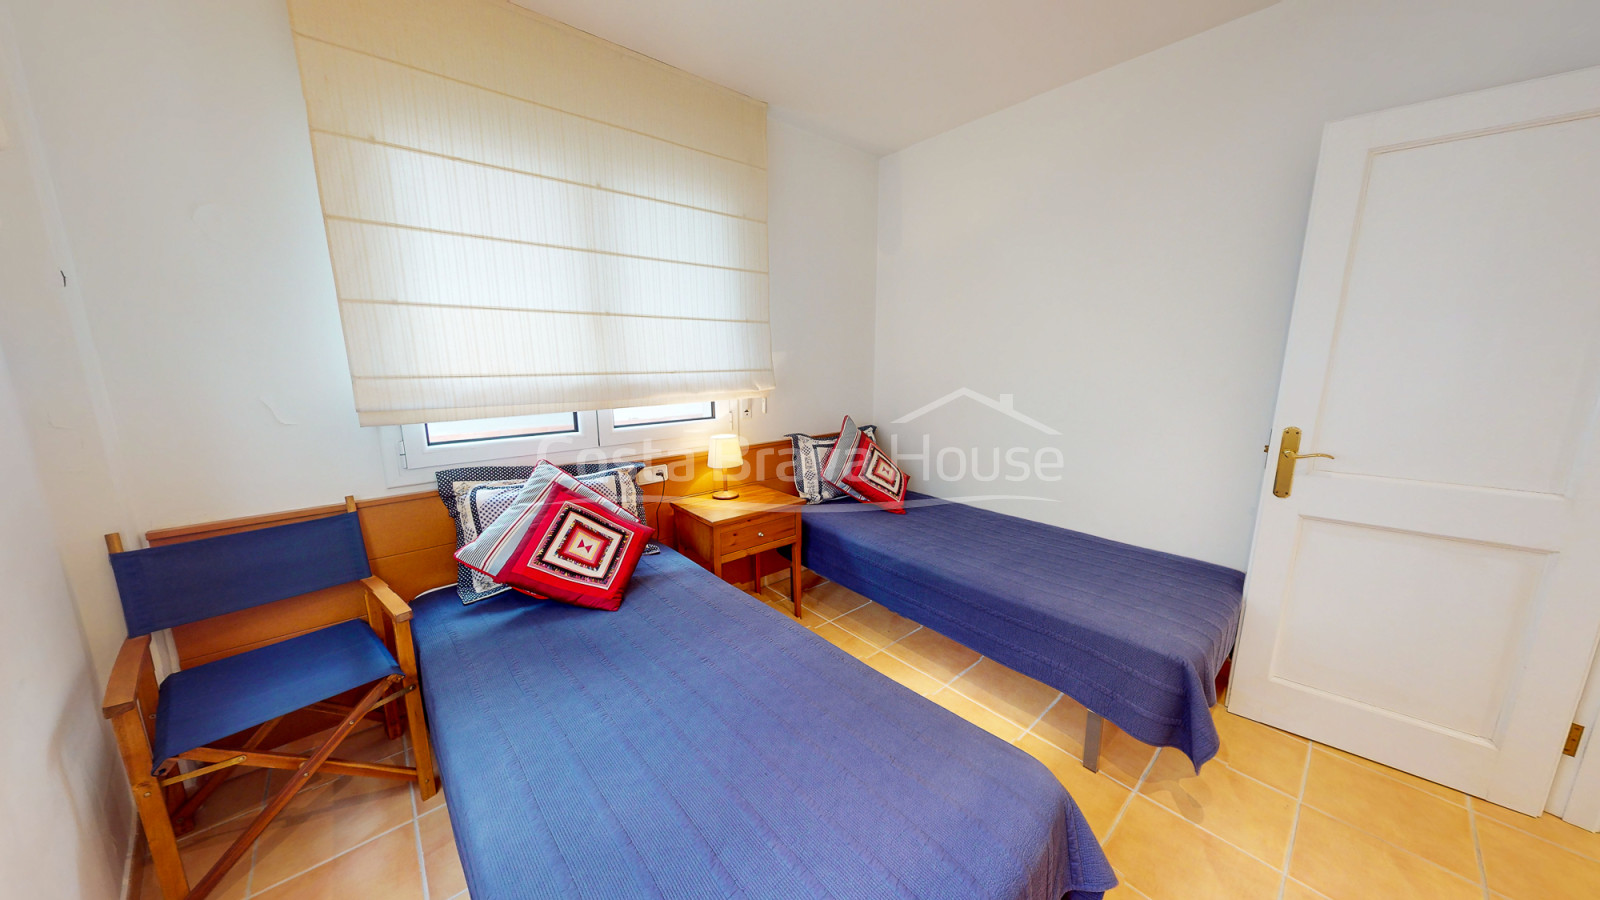 Apartment in Calella Palafrugell 1 minute walk from the beach